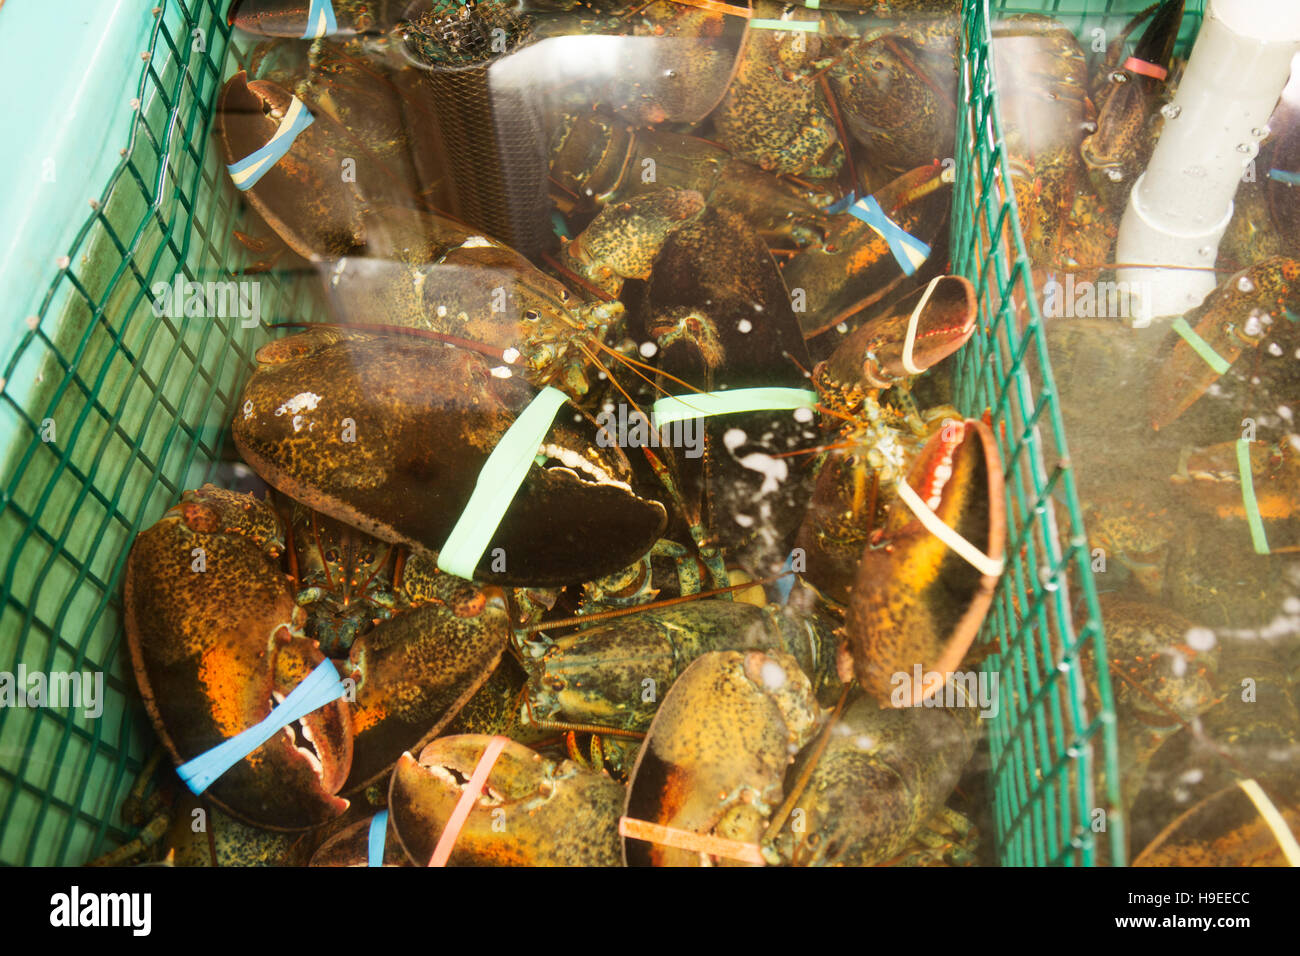 Lobsters in a cold water tank at Halls Harbour Lobster Pound in Nova Scotia, Canada. Hall's Harbour has a long history of lobster fishing. Stock Photo